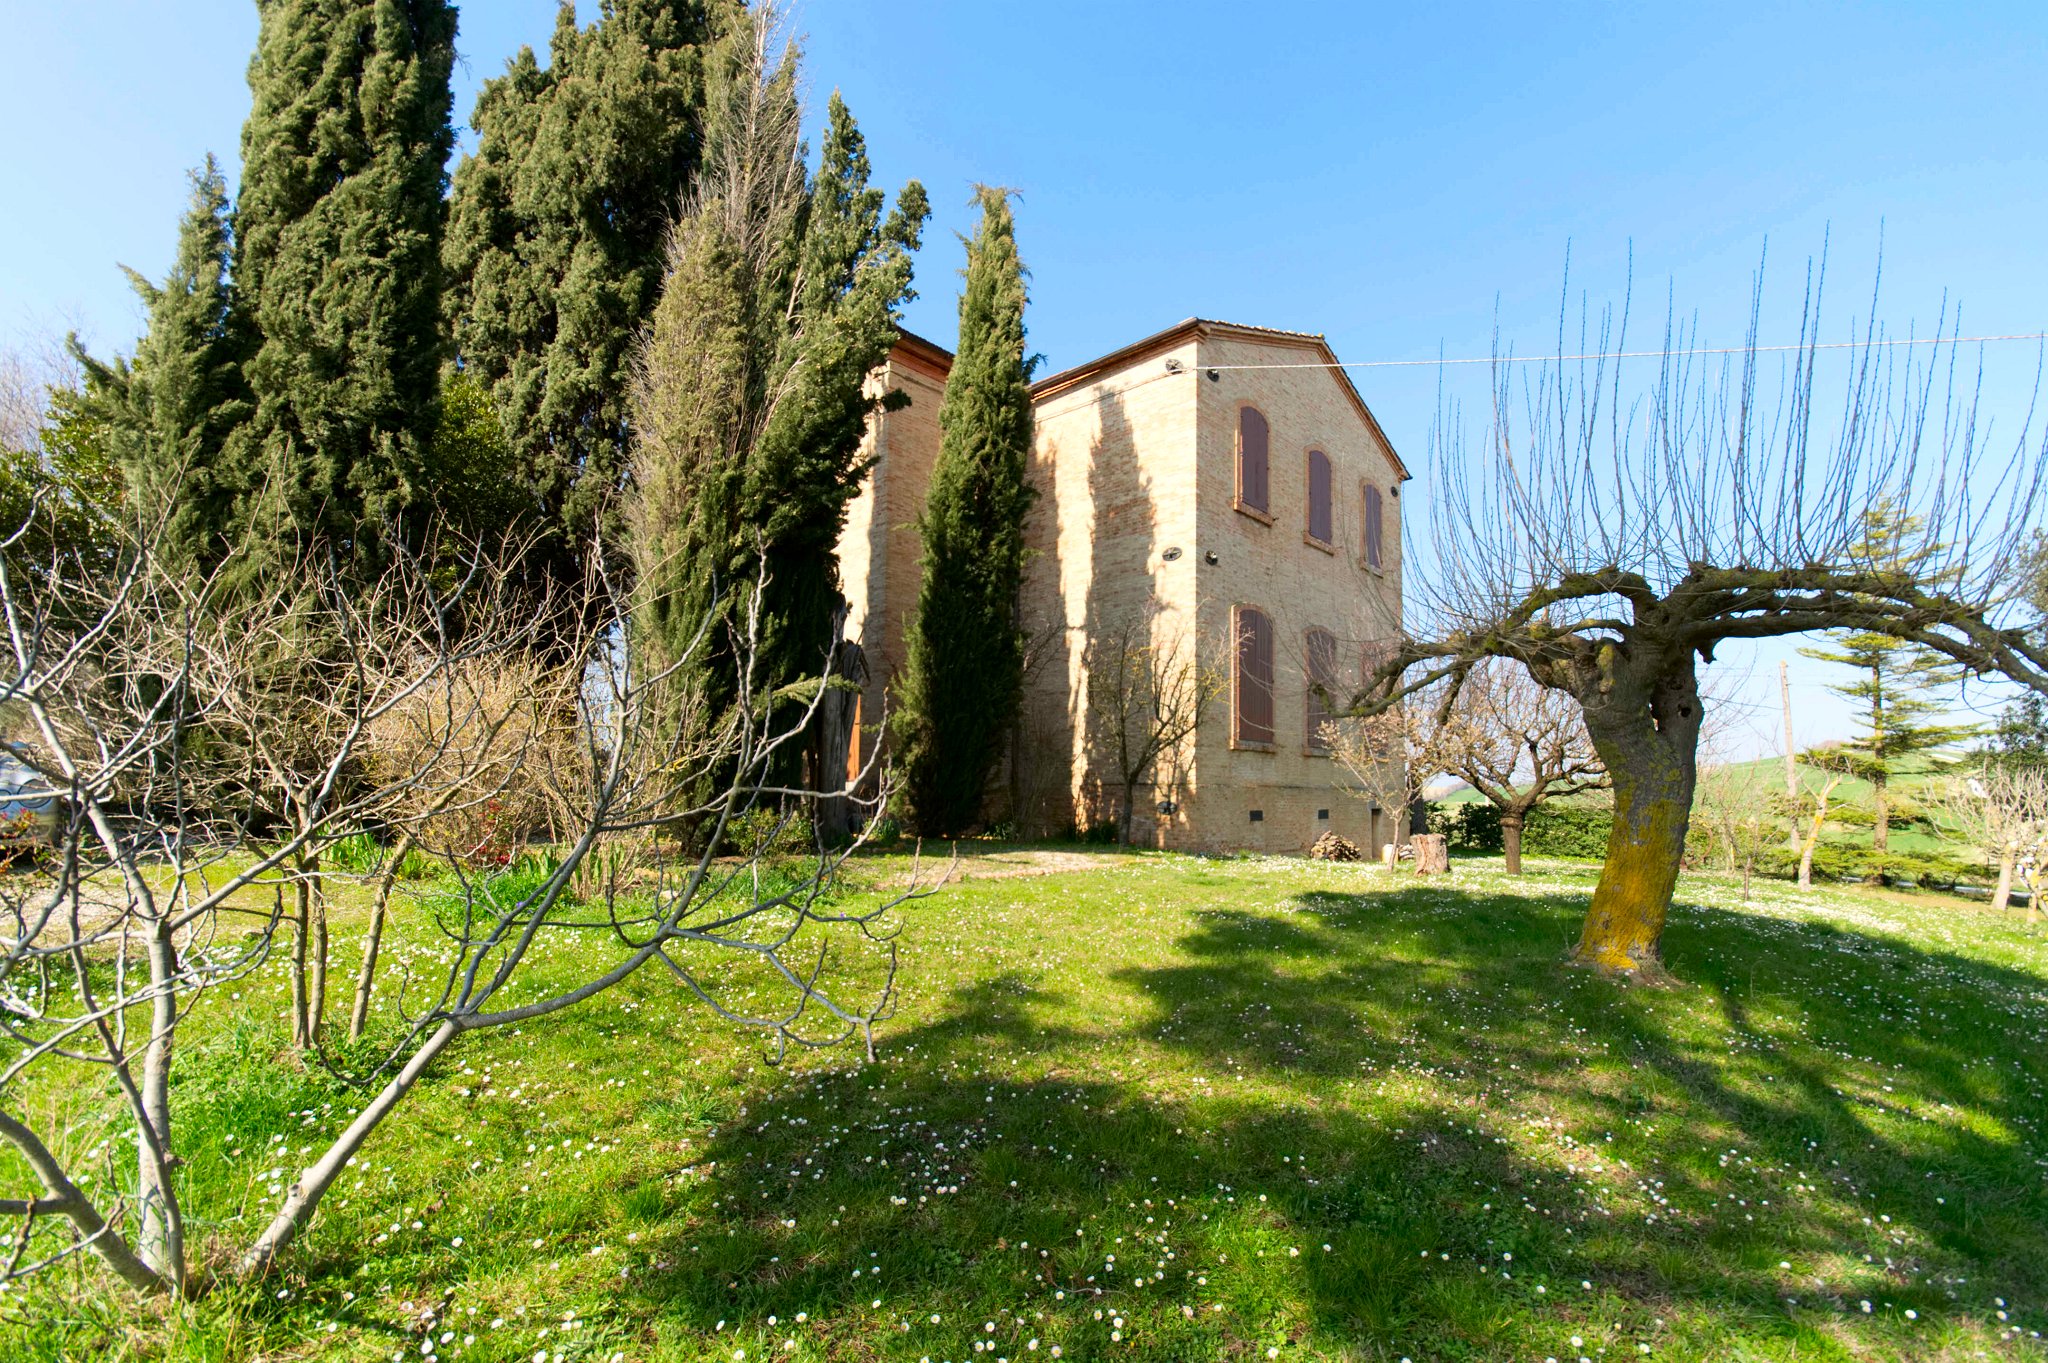 For Sale In The Marche Italy Country House In Nice Location